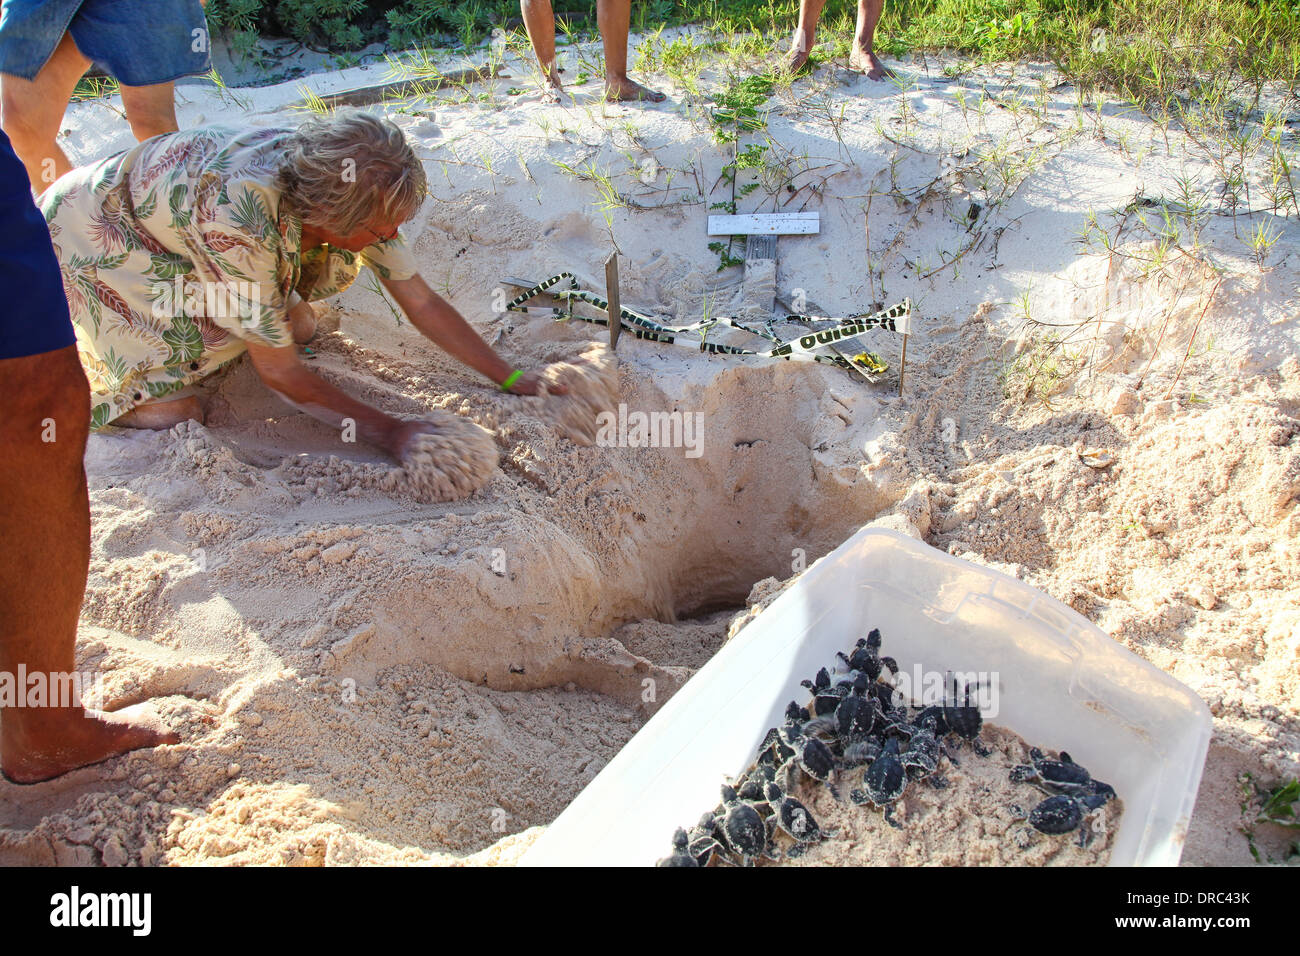 A man filling in a nest with sand and baby green Turtles in a box after being dug out of their nest, awaiting release, Cancun, Mexico Stock Photo